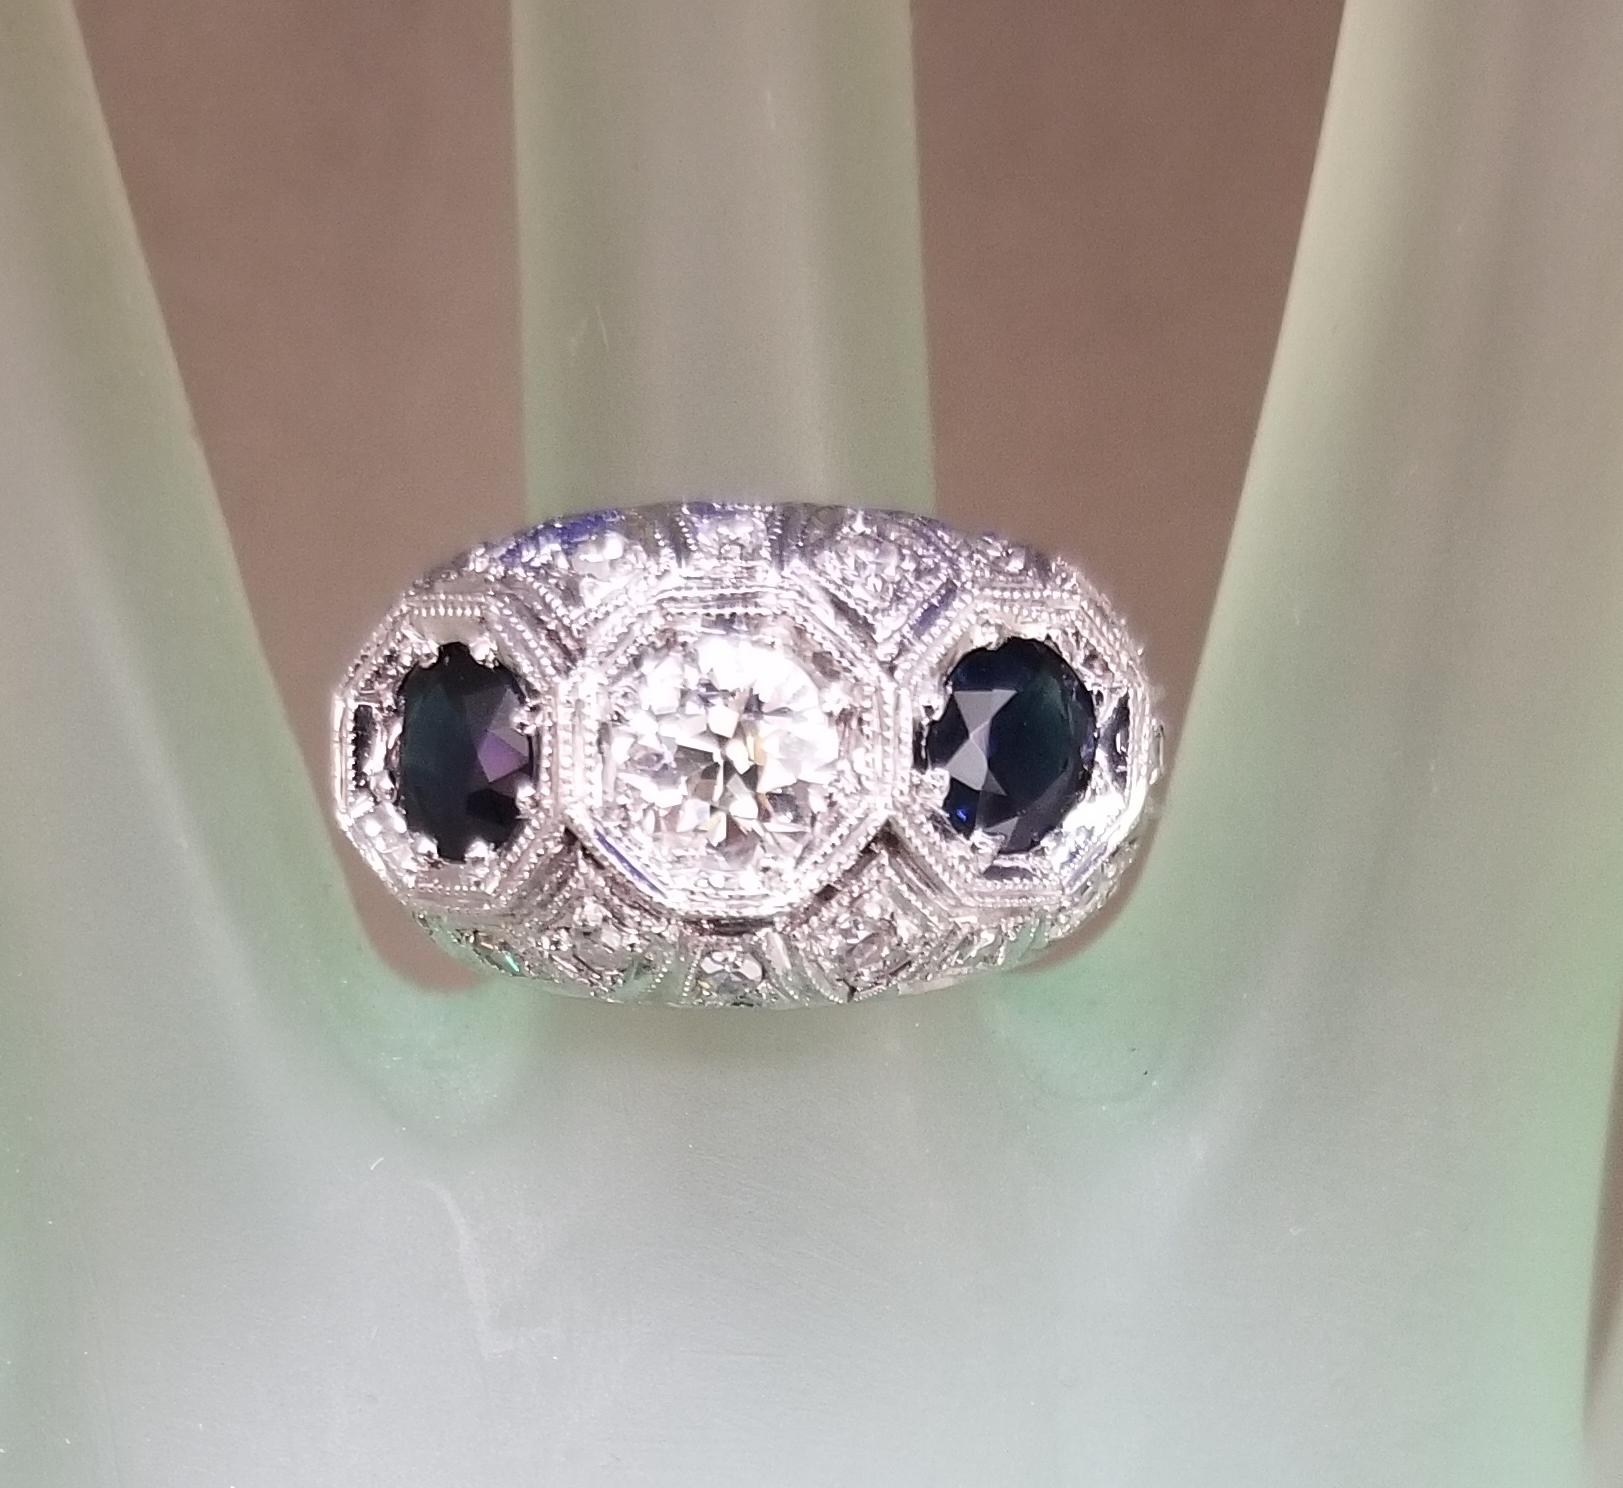 14k white gold ladies diamond and sapphire ring, containing 1 